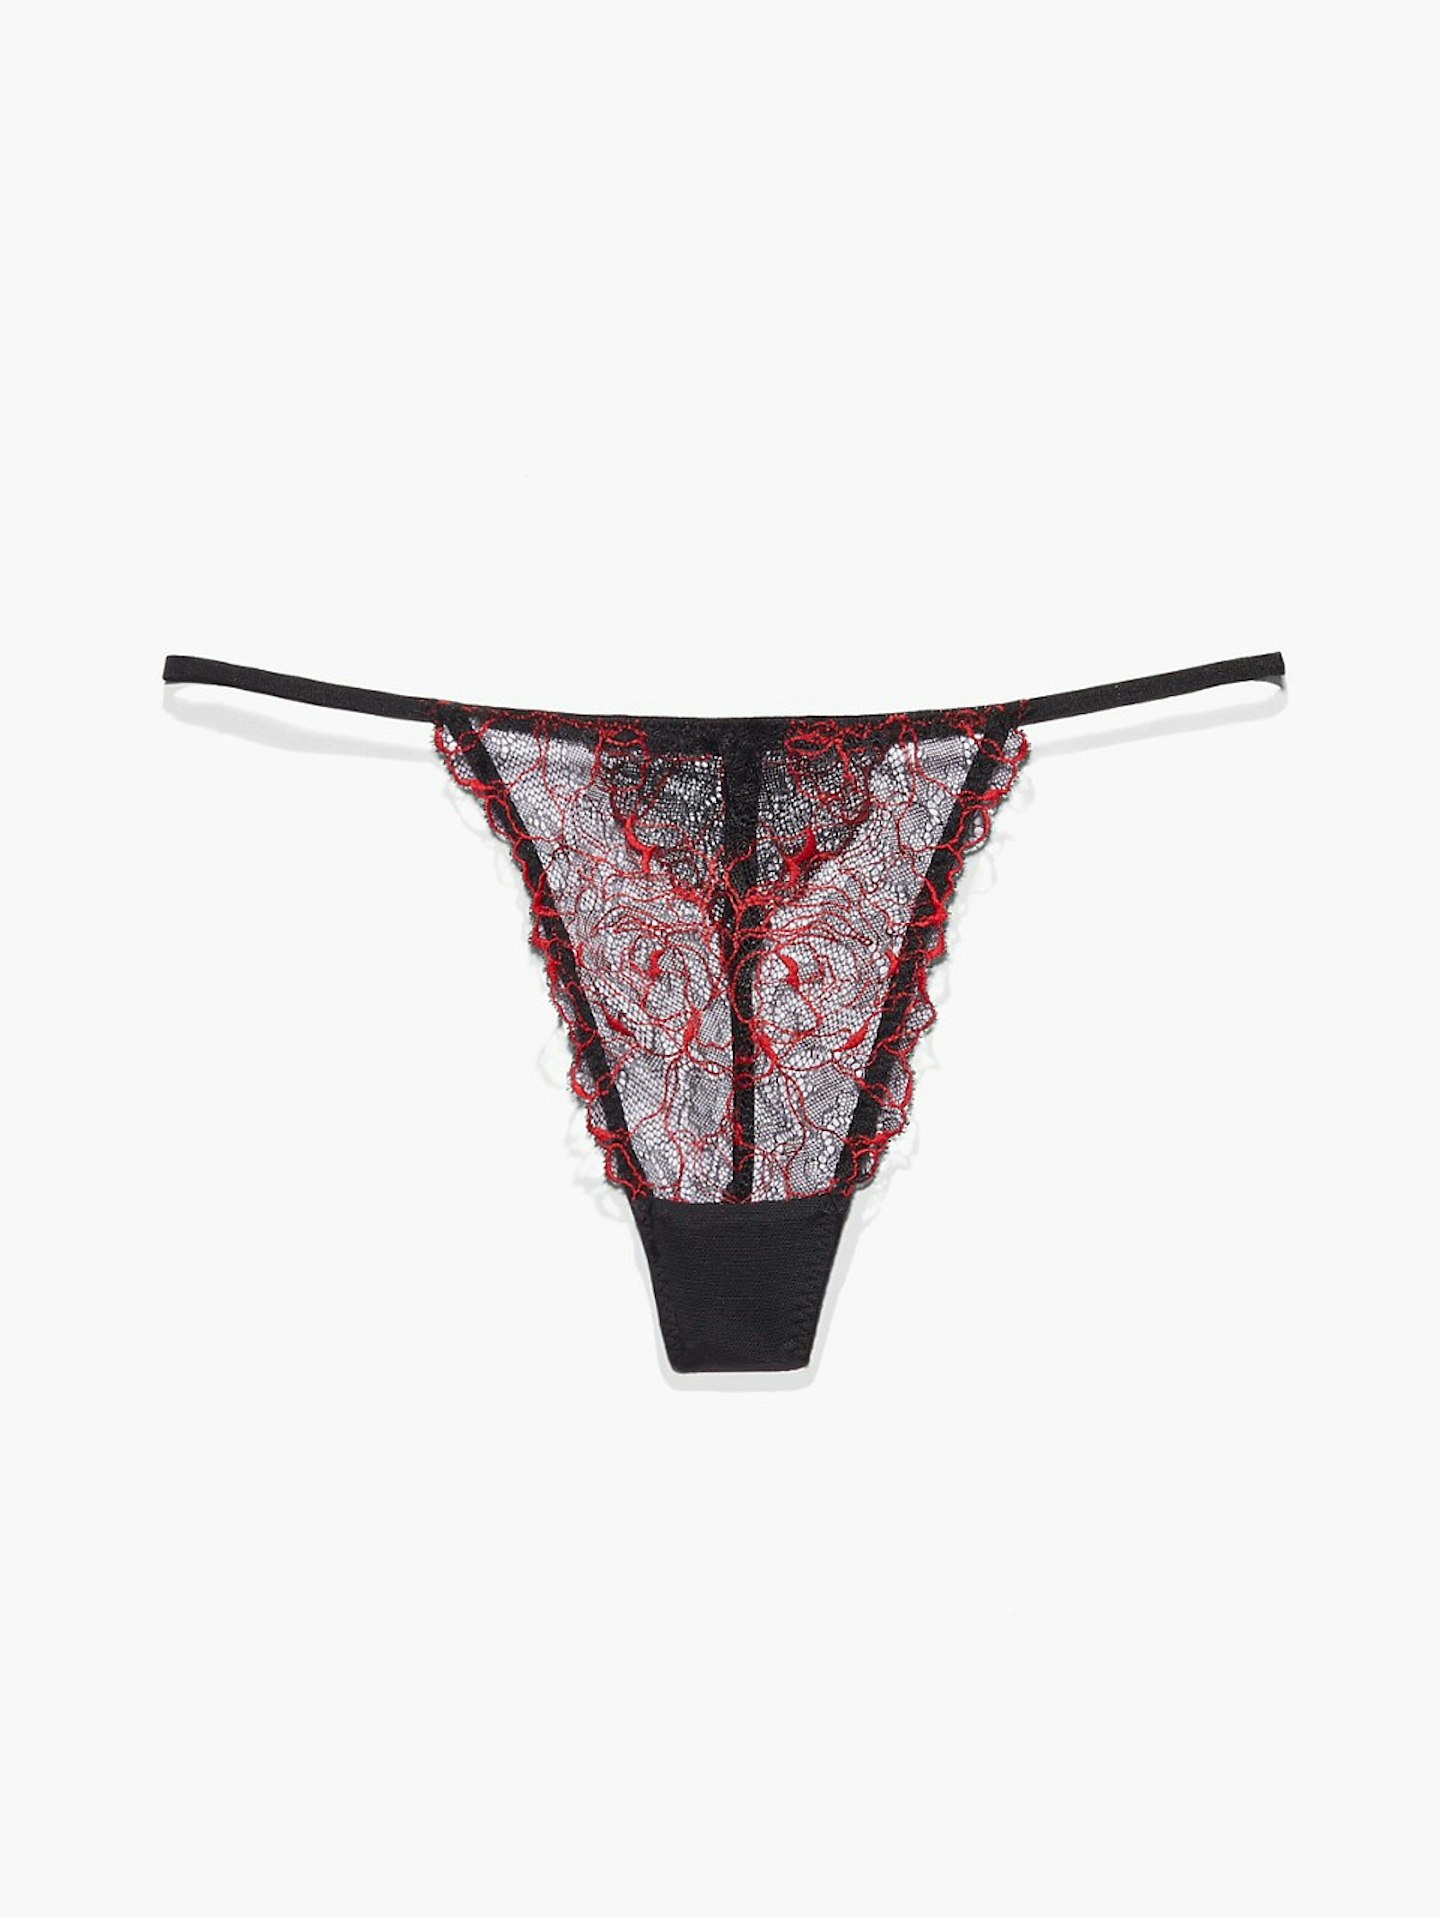 Embroidered Lace G-String, £6.40